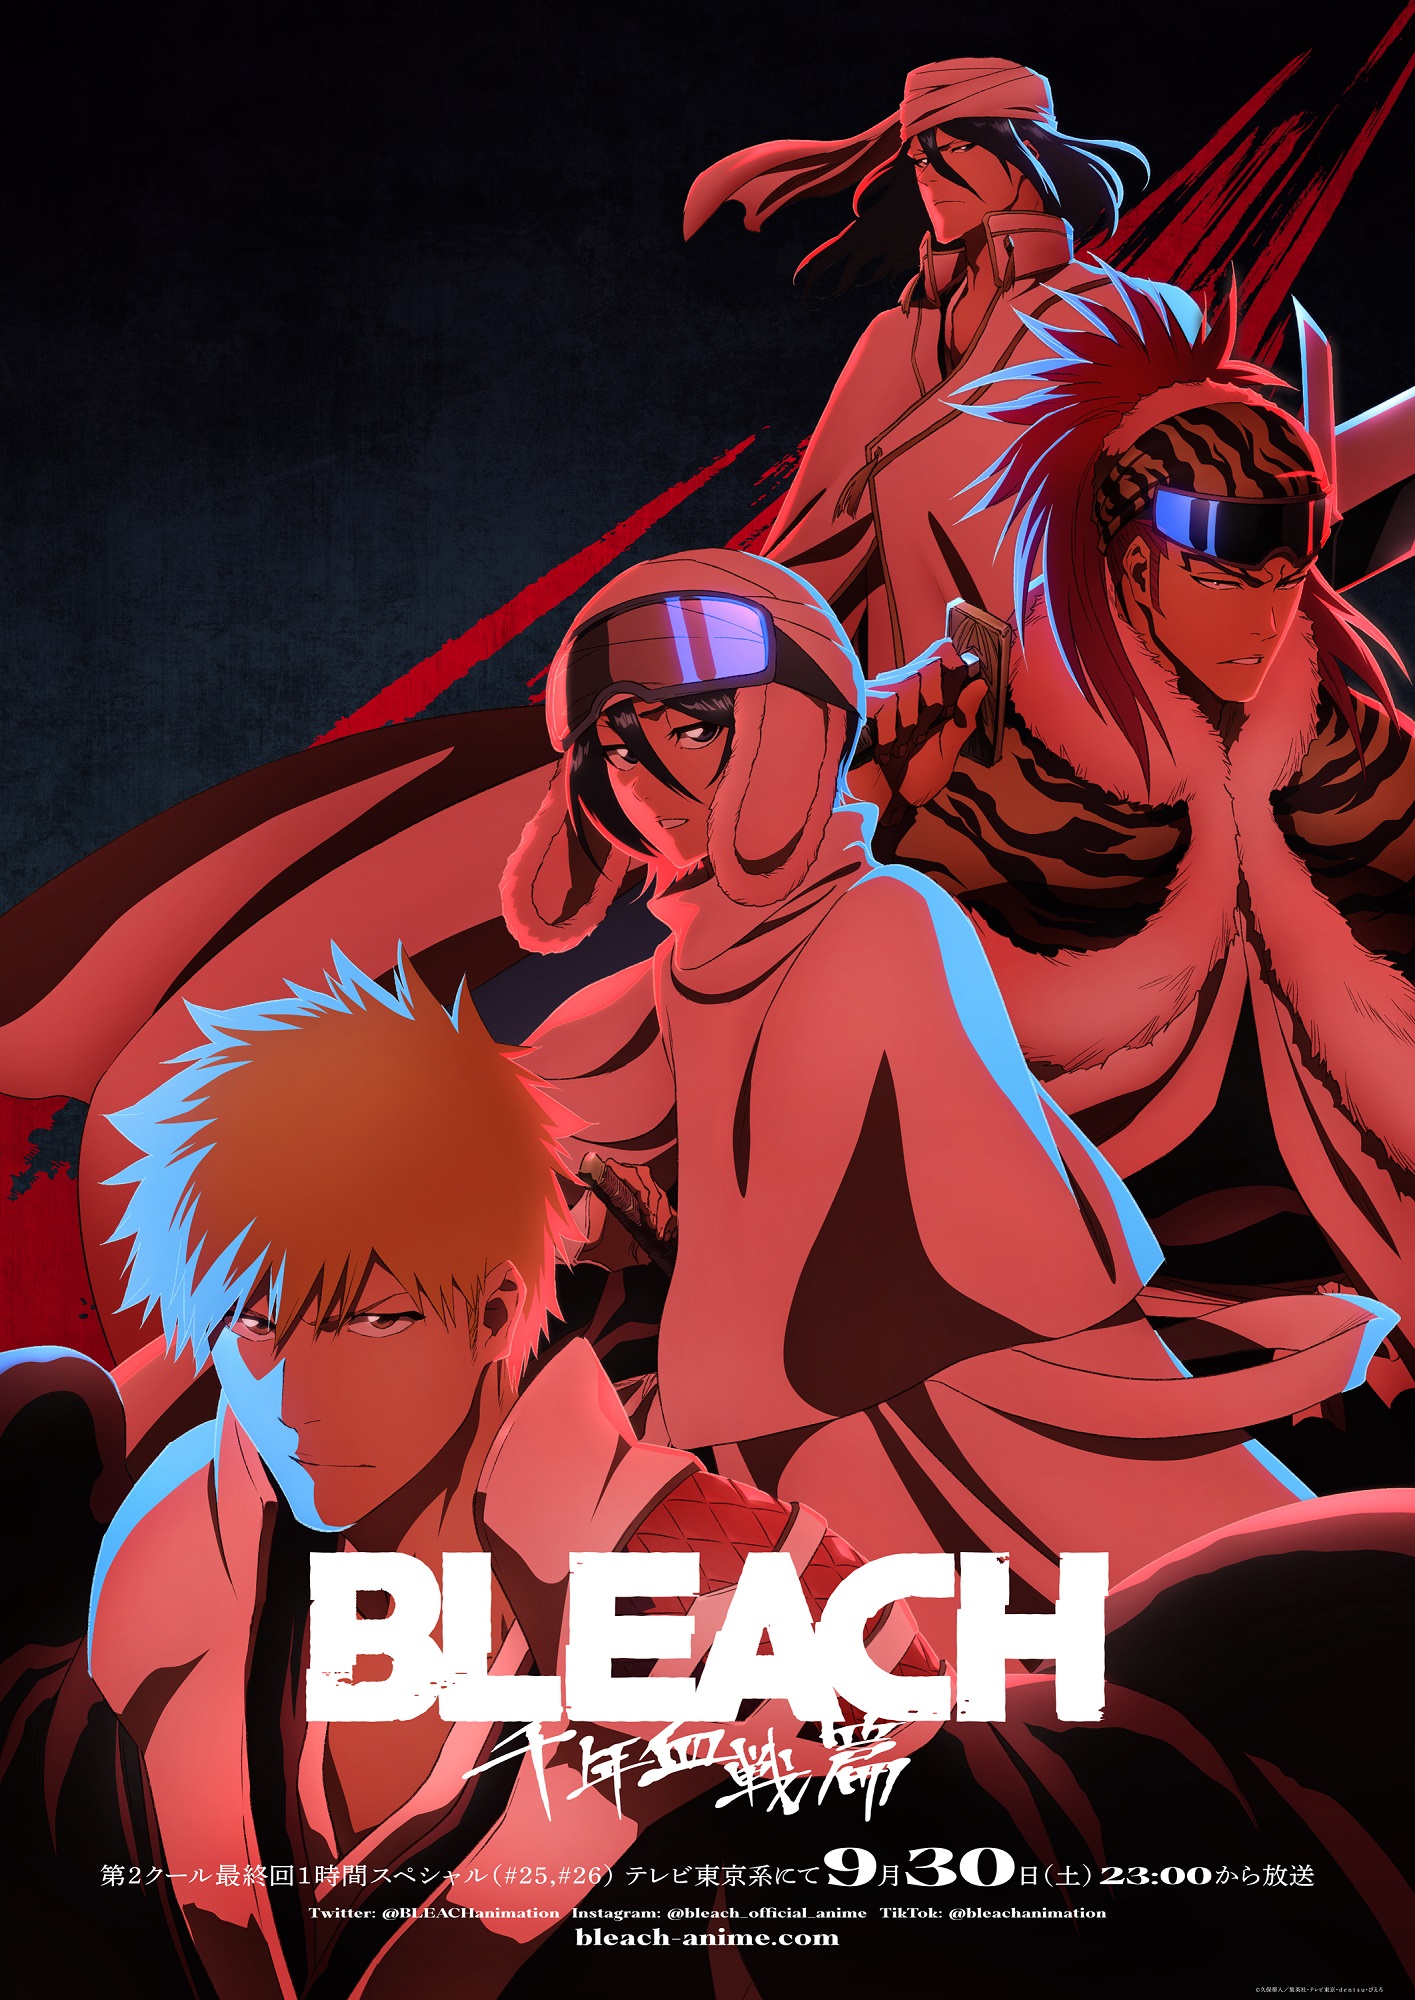 Bleach TYBW part 2 episode 9: Release date, time, where to watch